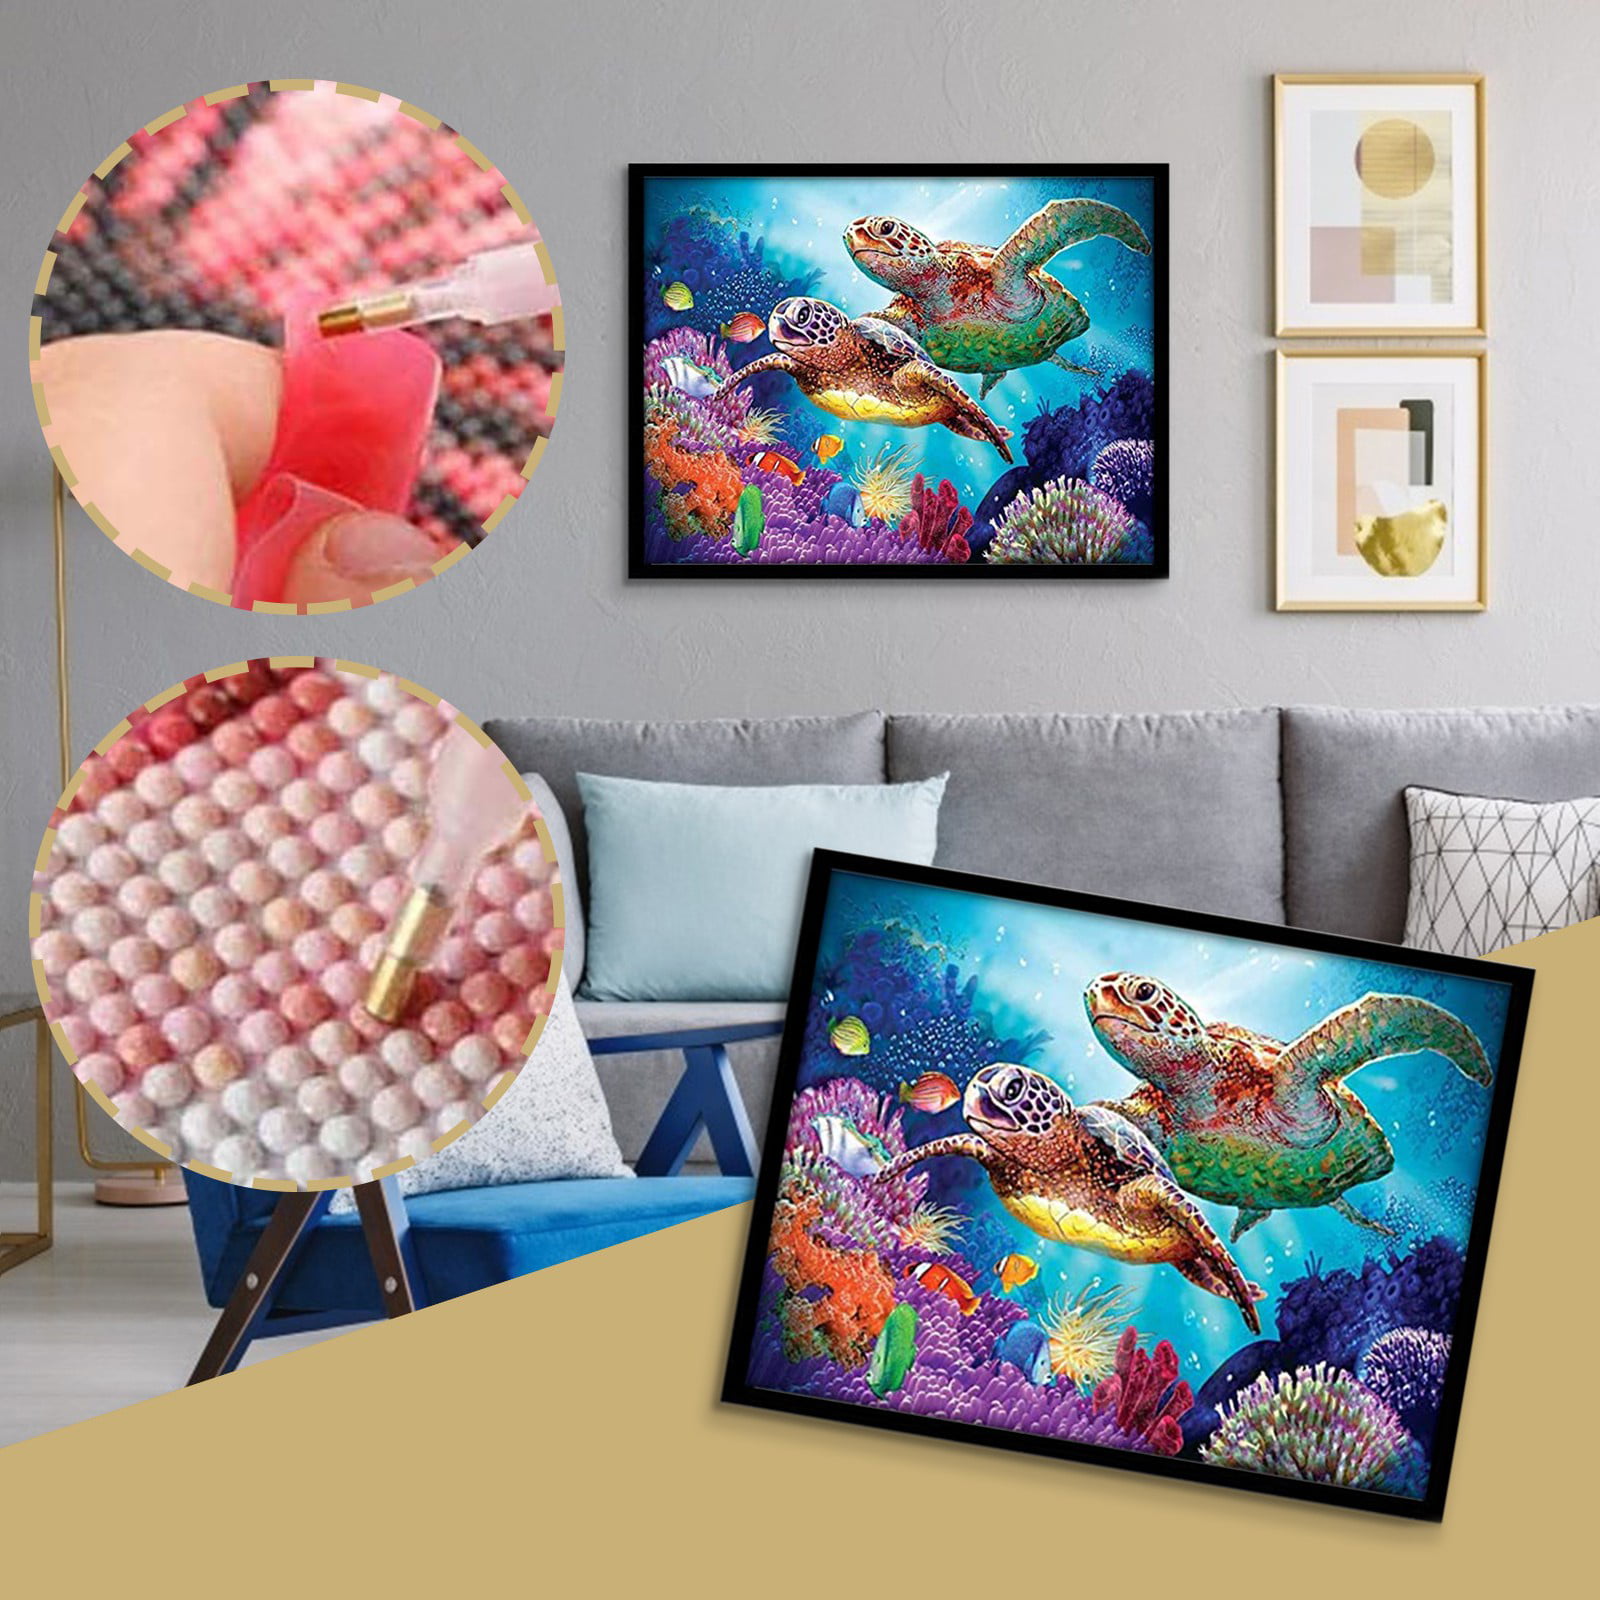 Black and Friday Deals 50% Off Clear Clearance under $10 Dealovy 5D  Embroidery Paintings Rhinestone Pasted Diy Diamond Painting Cross Sti  Clearance 